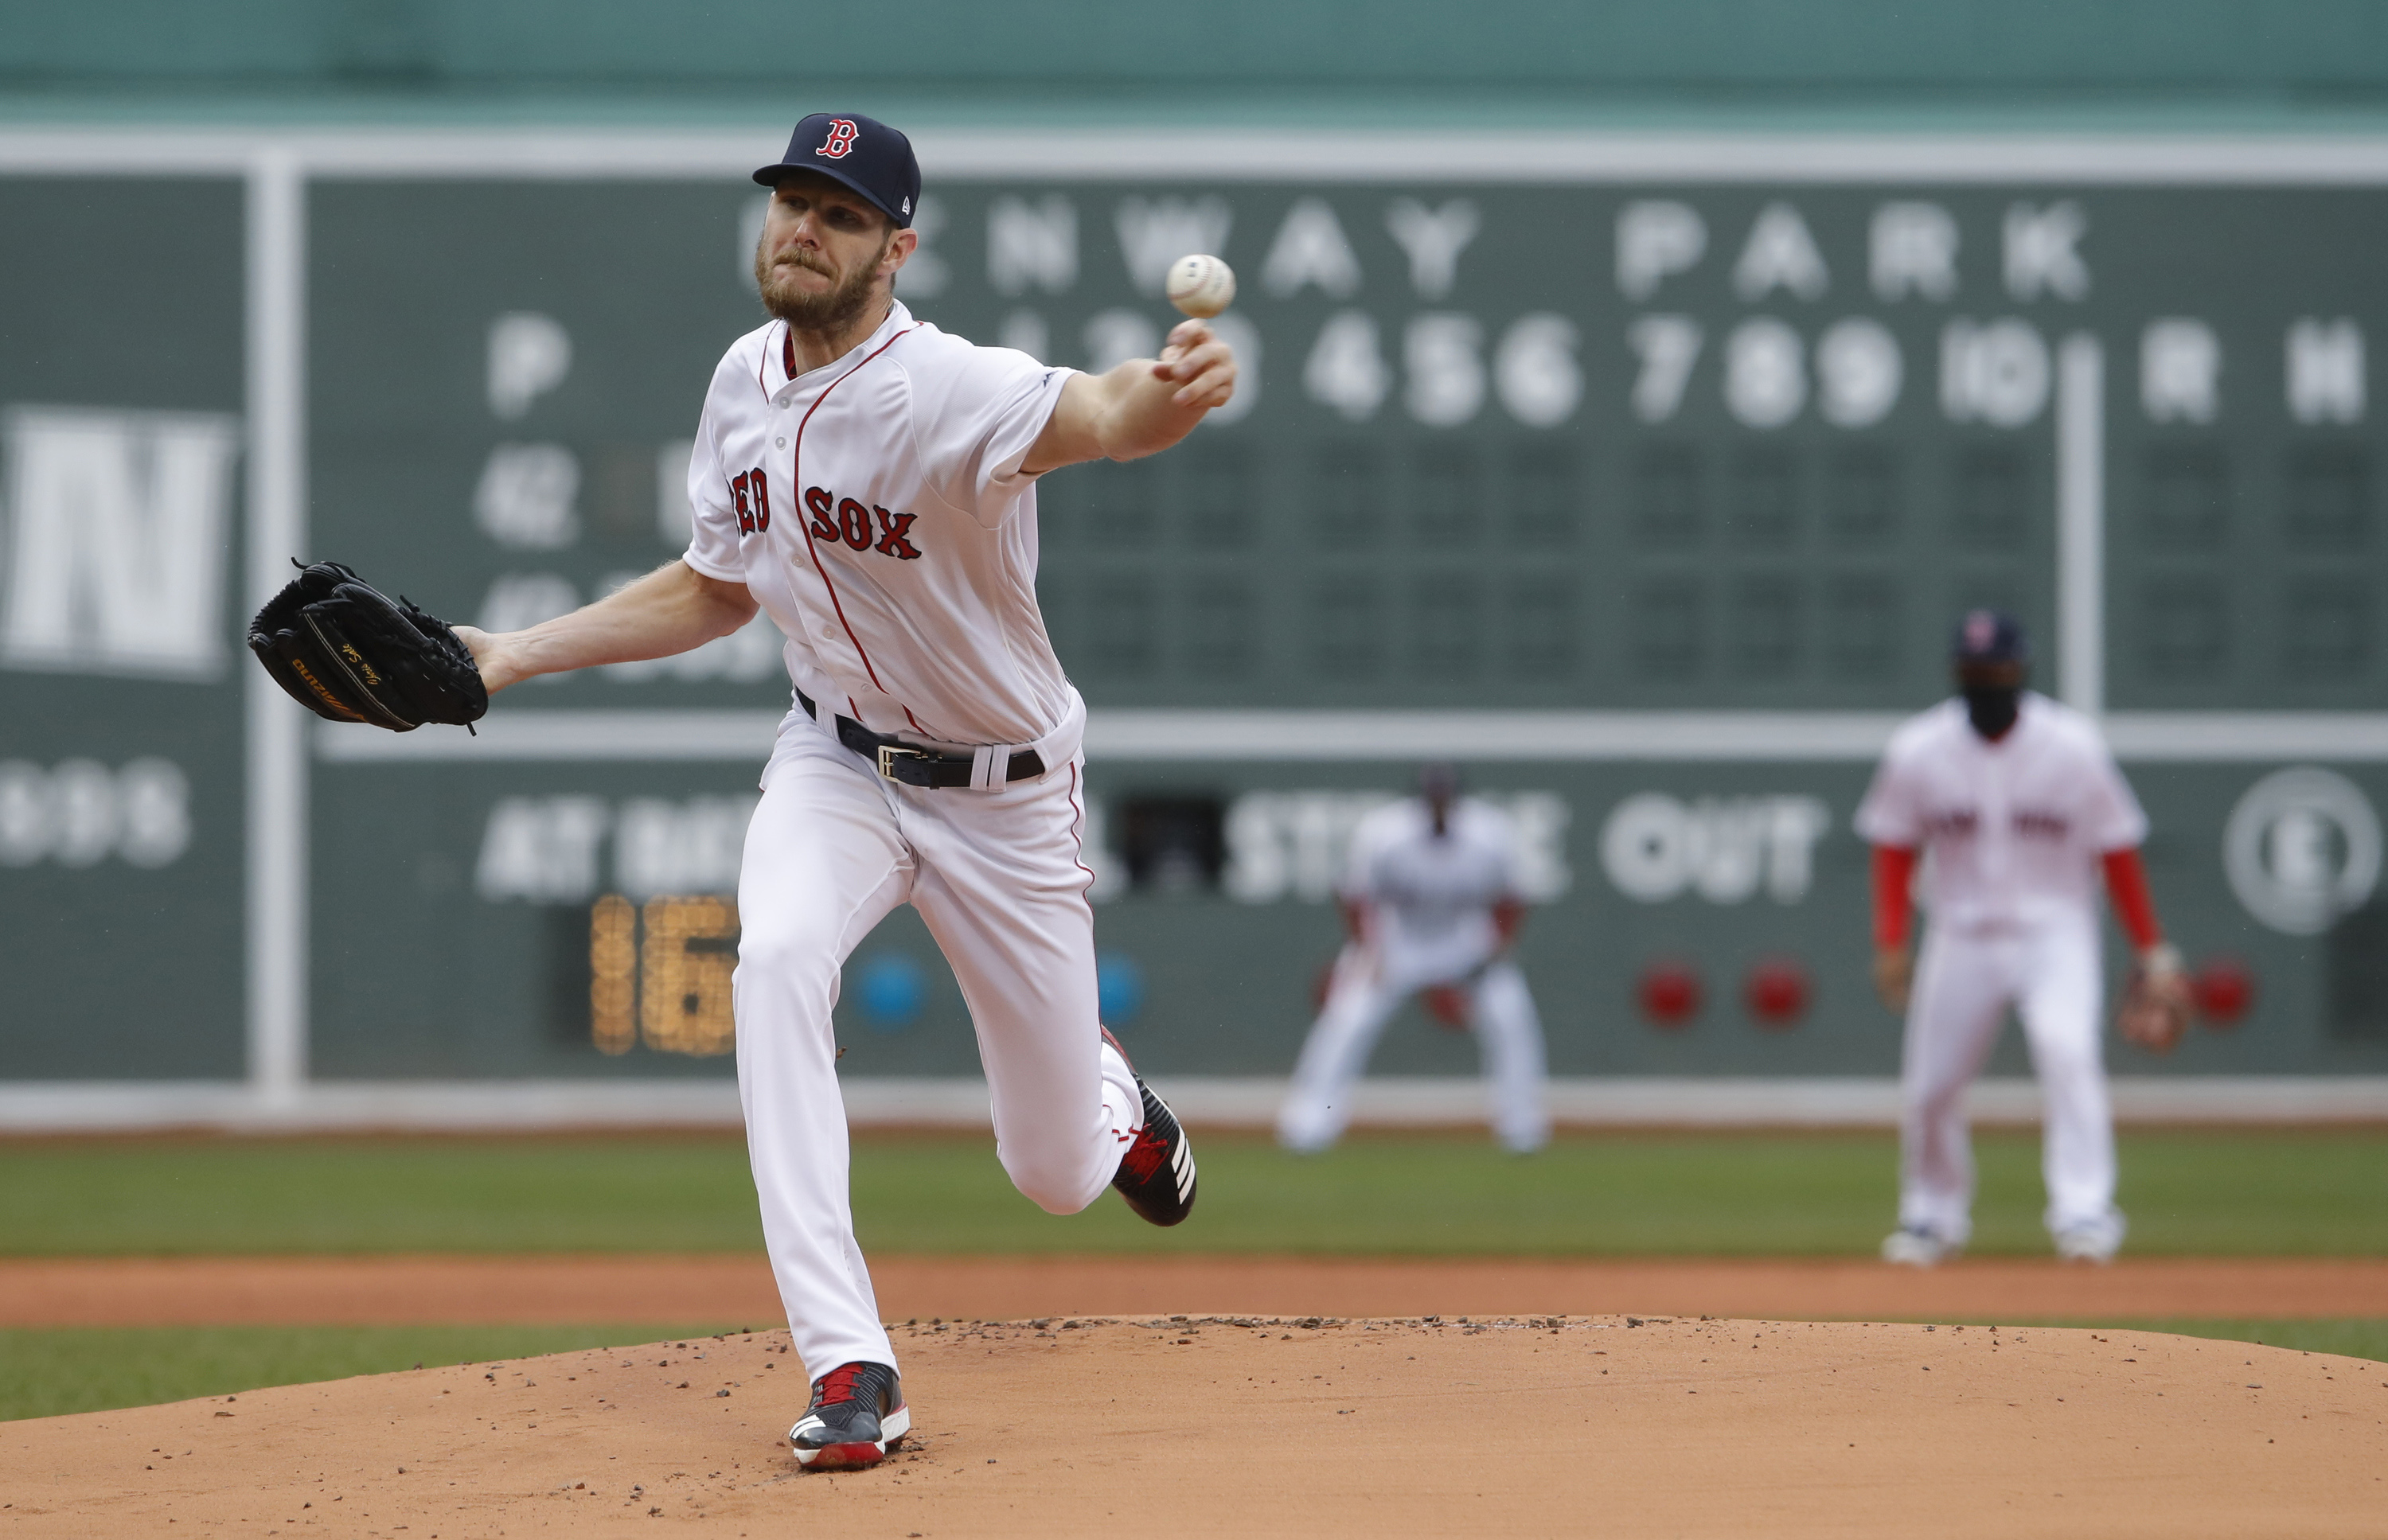 Apr 15, 2018; Boston, MA, USA; Boston Red Sox starting pitcher Chris Sale throws the ball against the Baltimore Orioles in the first inning at Fenway Park. Mandatory Credit: David Butler II-USA TODAY Sports